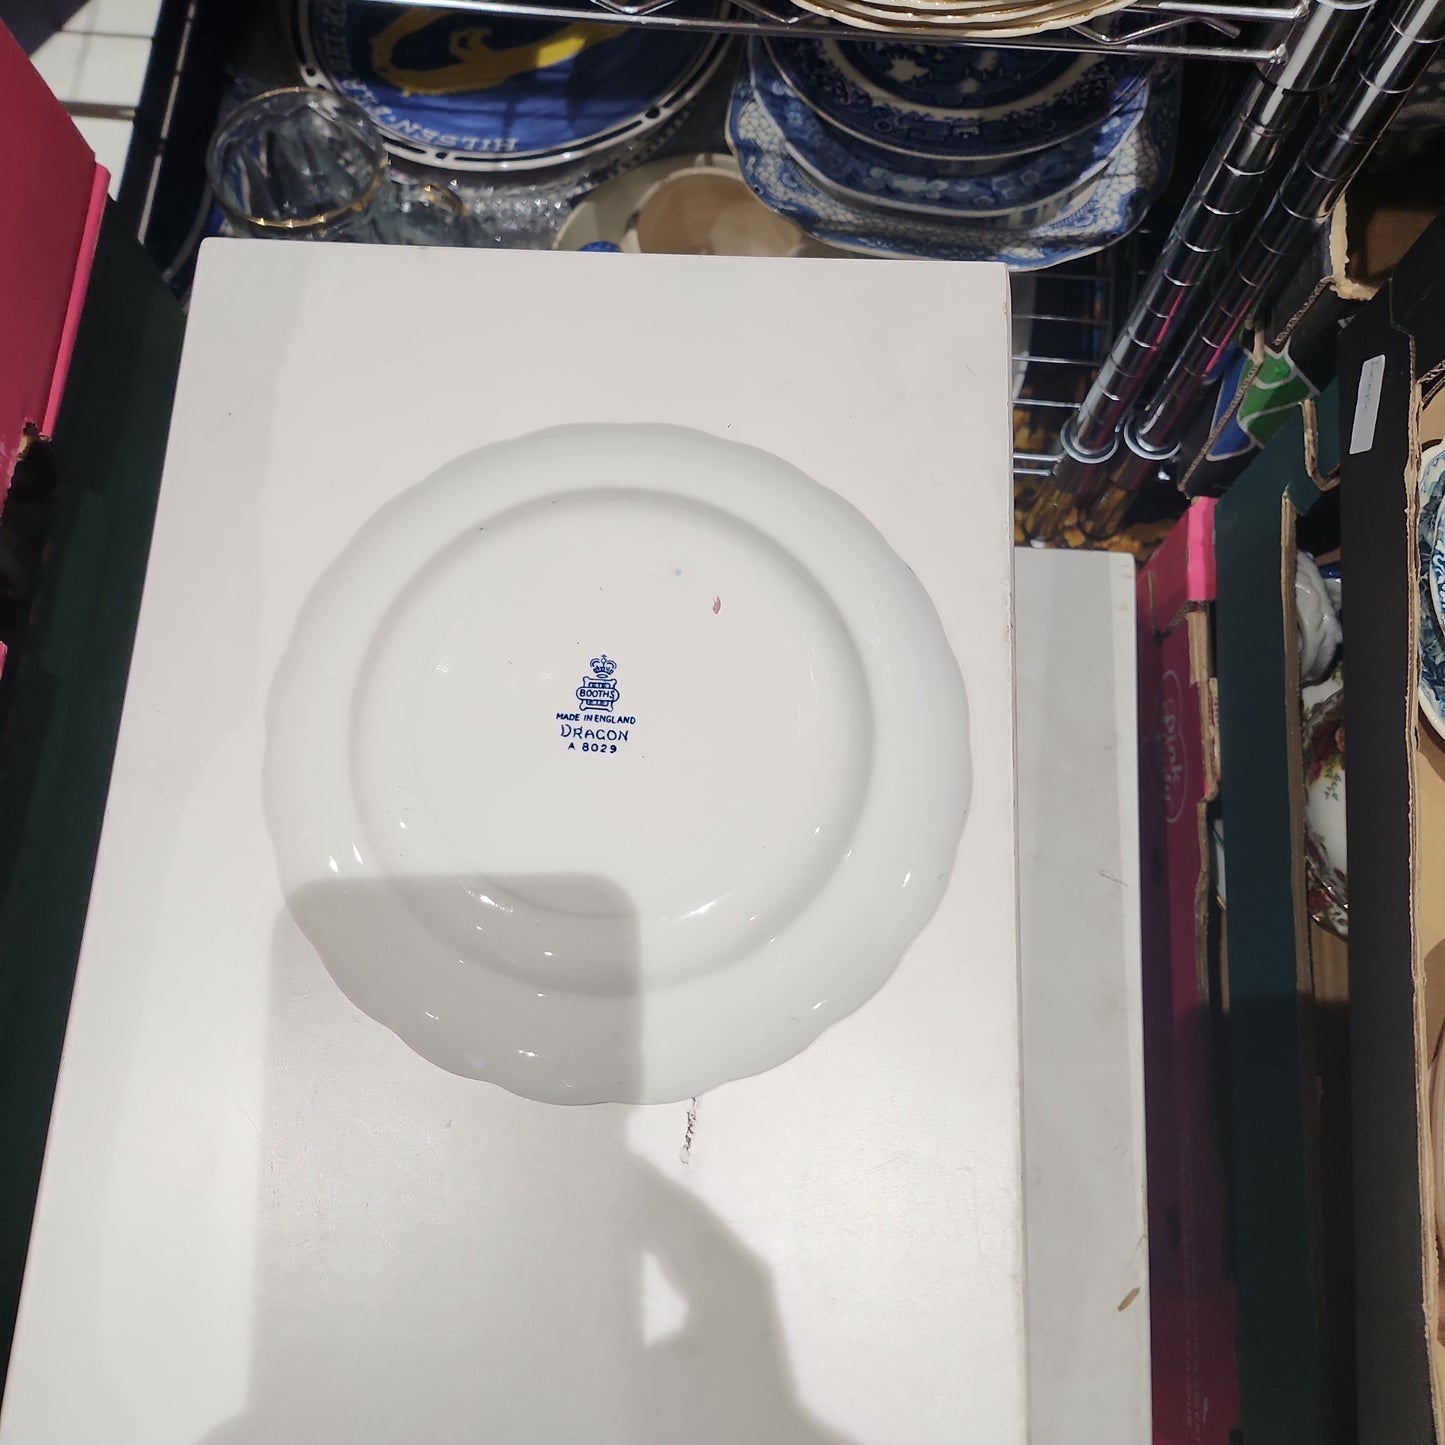 Booths blue and white 19 cm plate